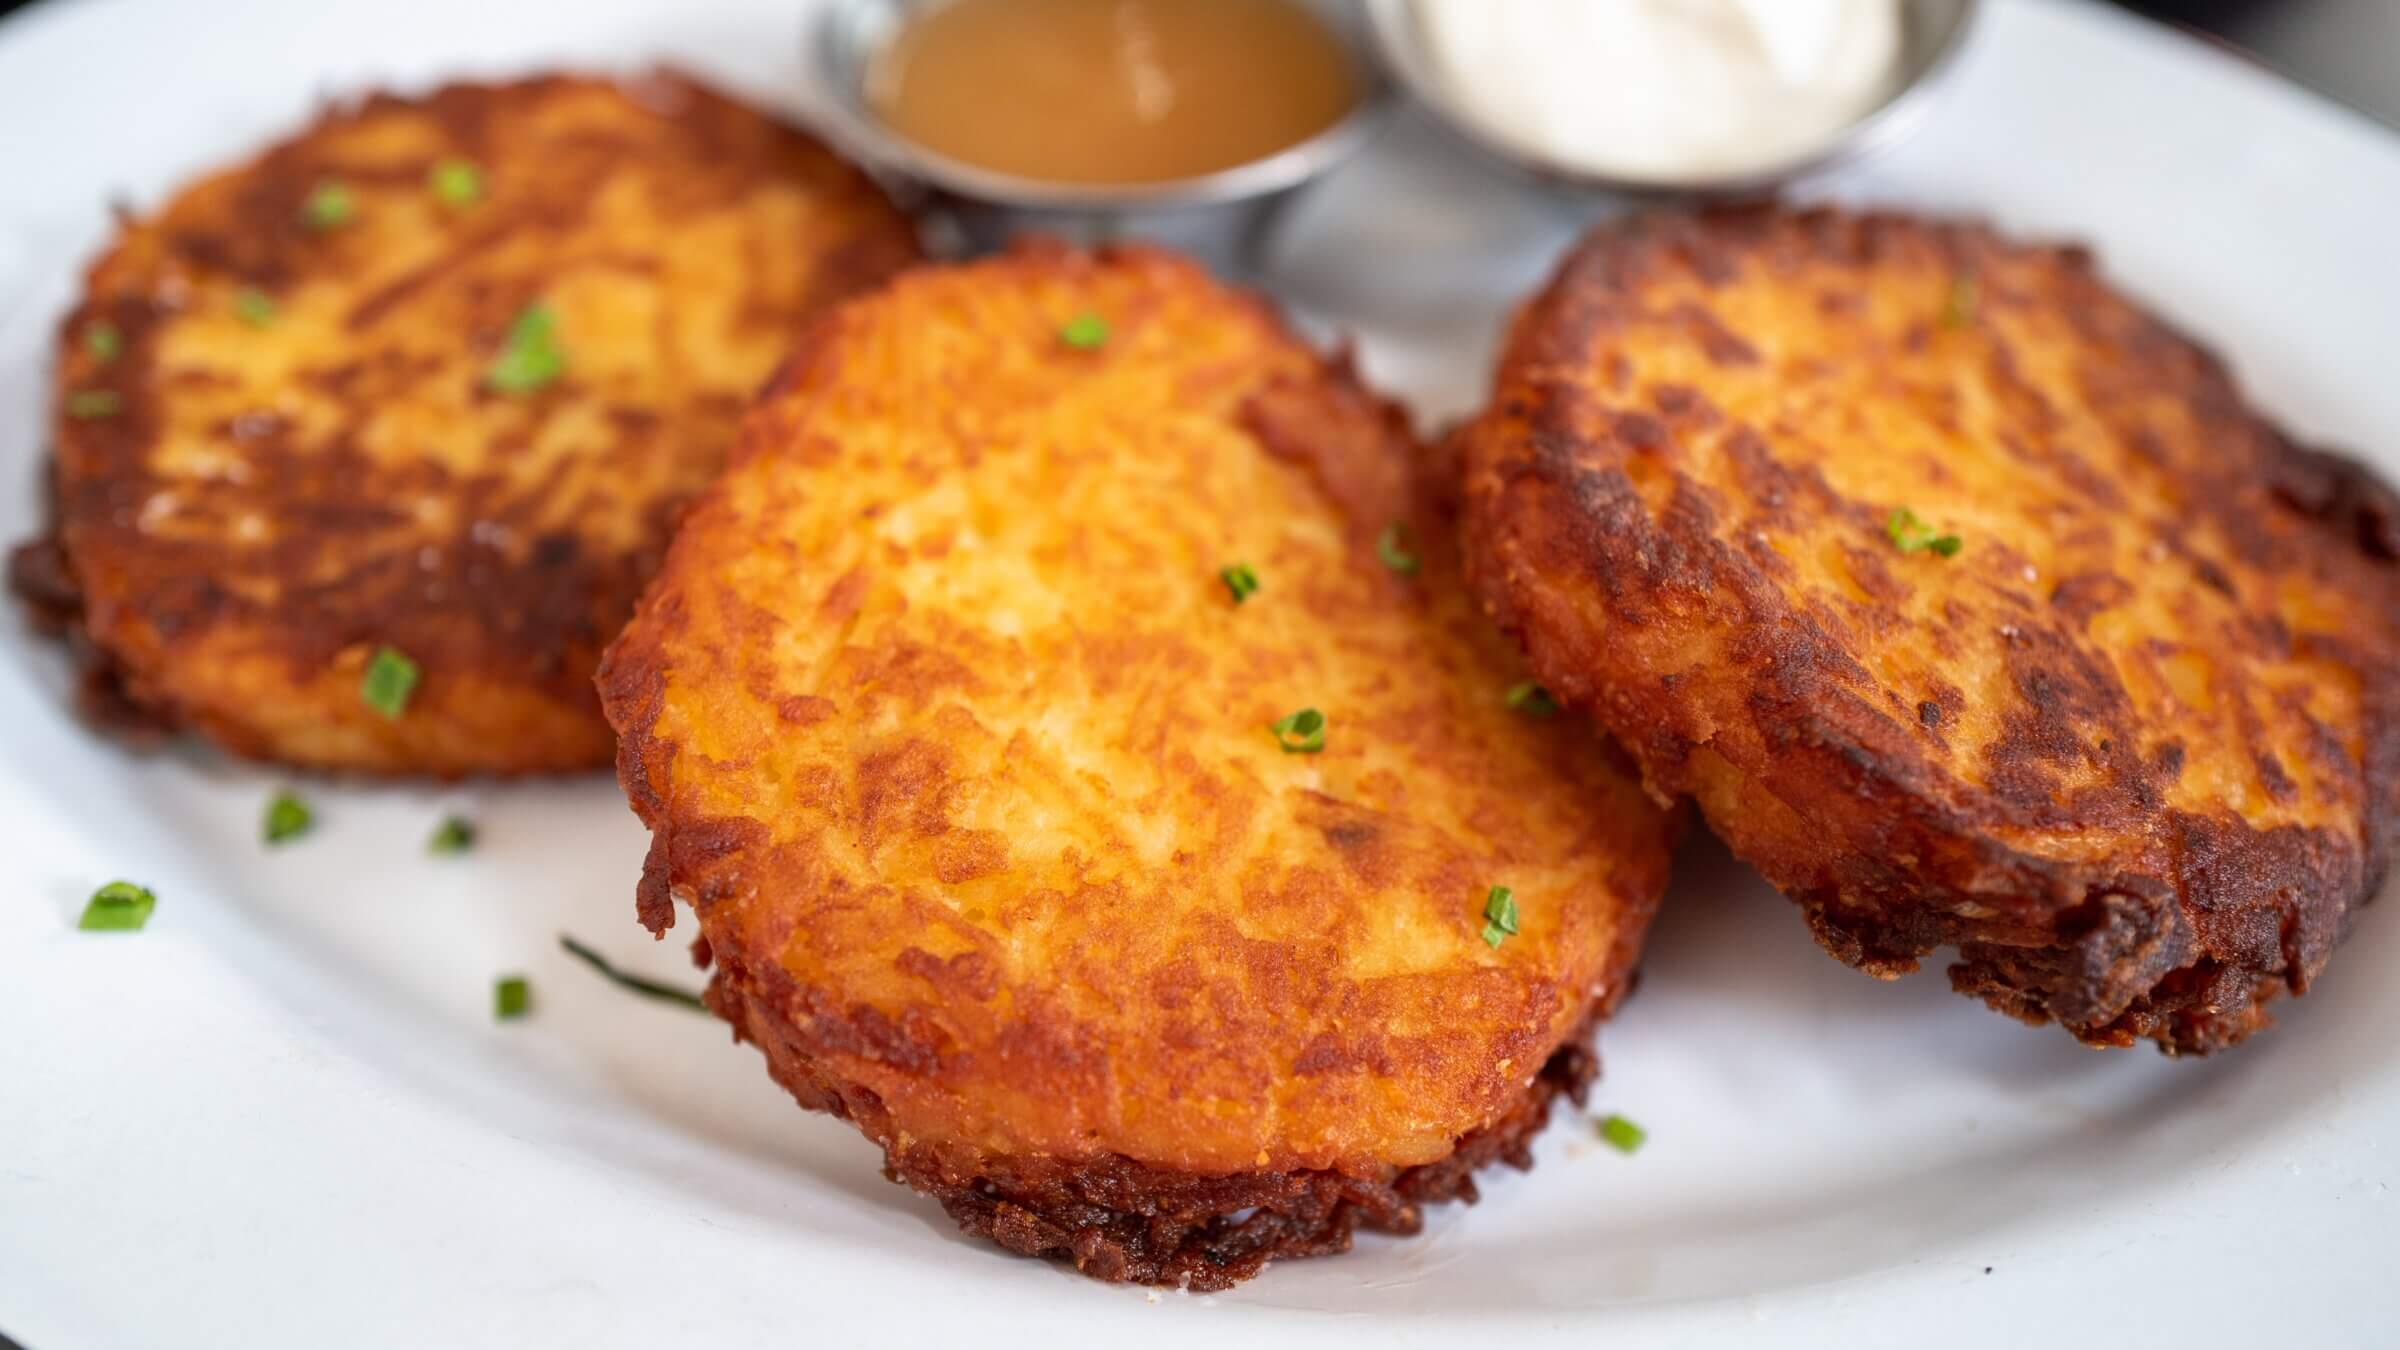 Potato latkes at Wise Sons deli at the Contemporary Jewish Museum in San Francisco.